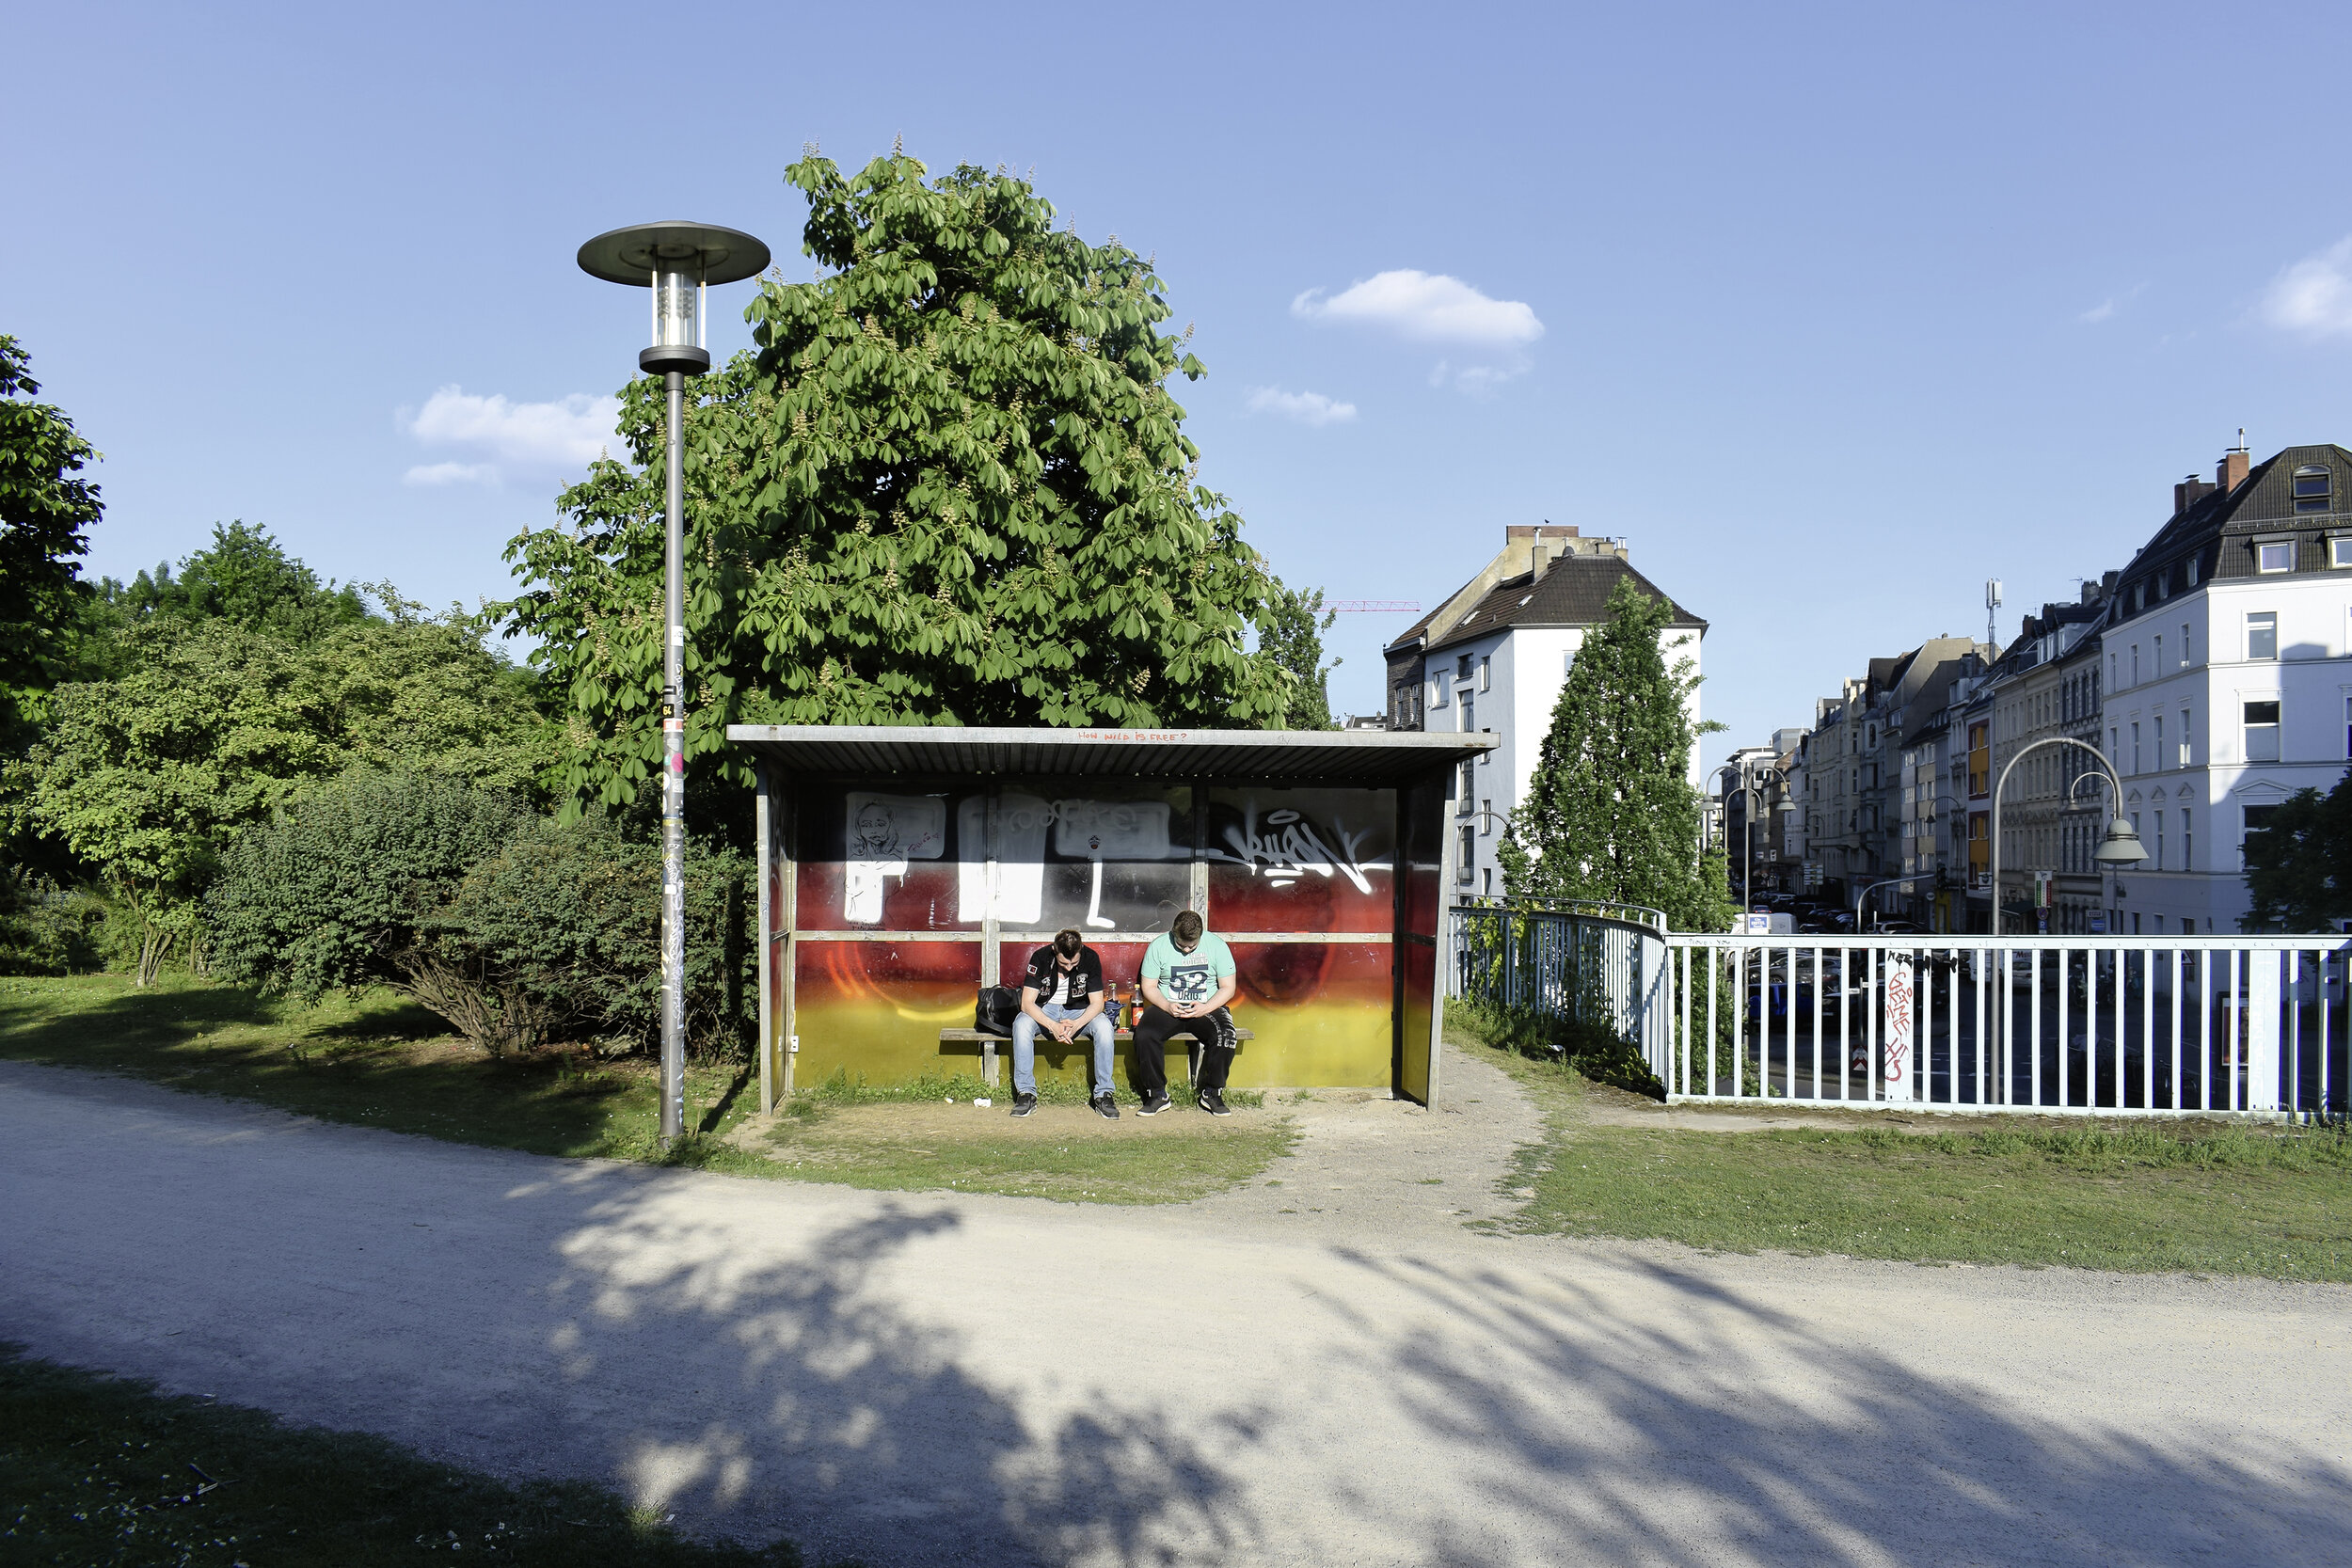 Bus Stop Germany, 2017